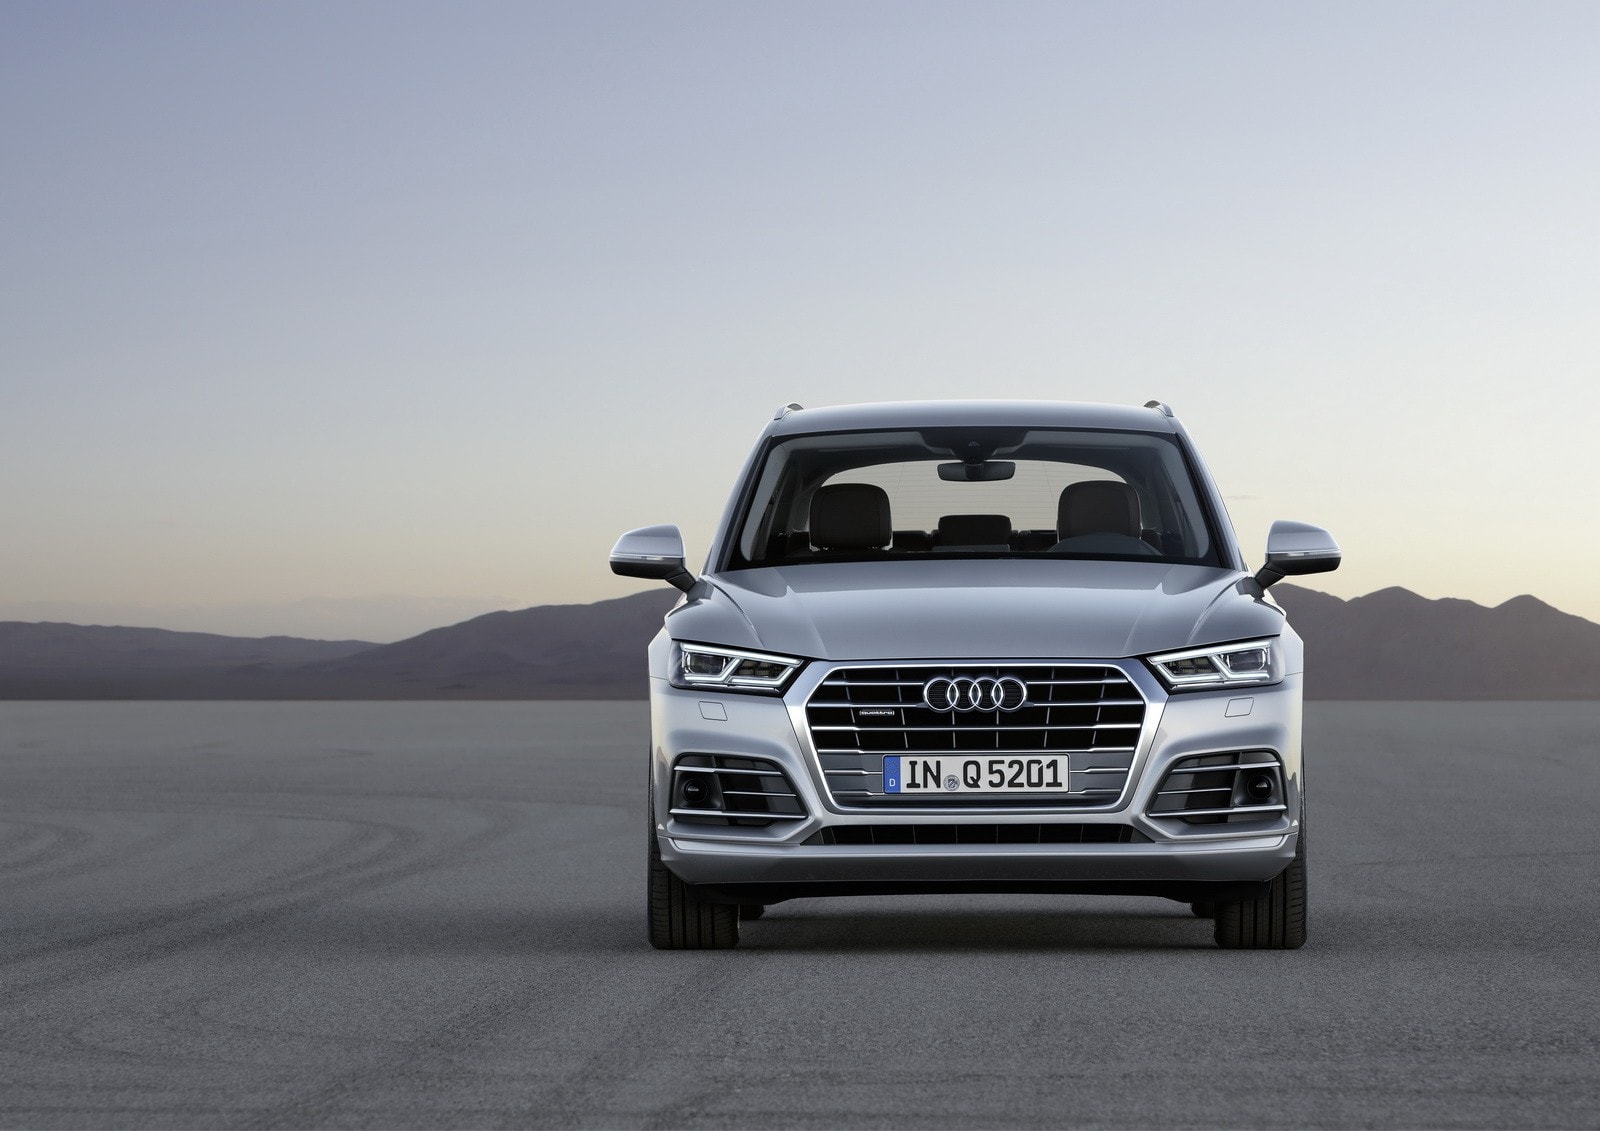 2017 Audi Q5 Priced From EUR 39,500 / GBP 37,170 - autoevolution